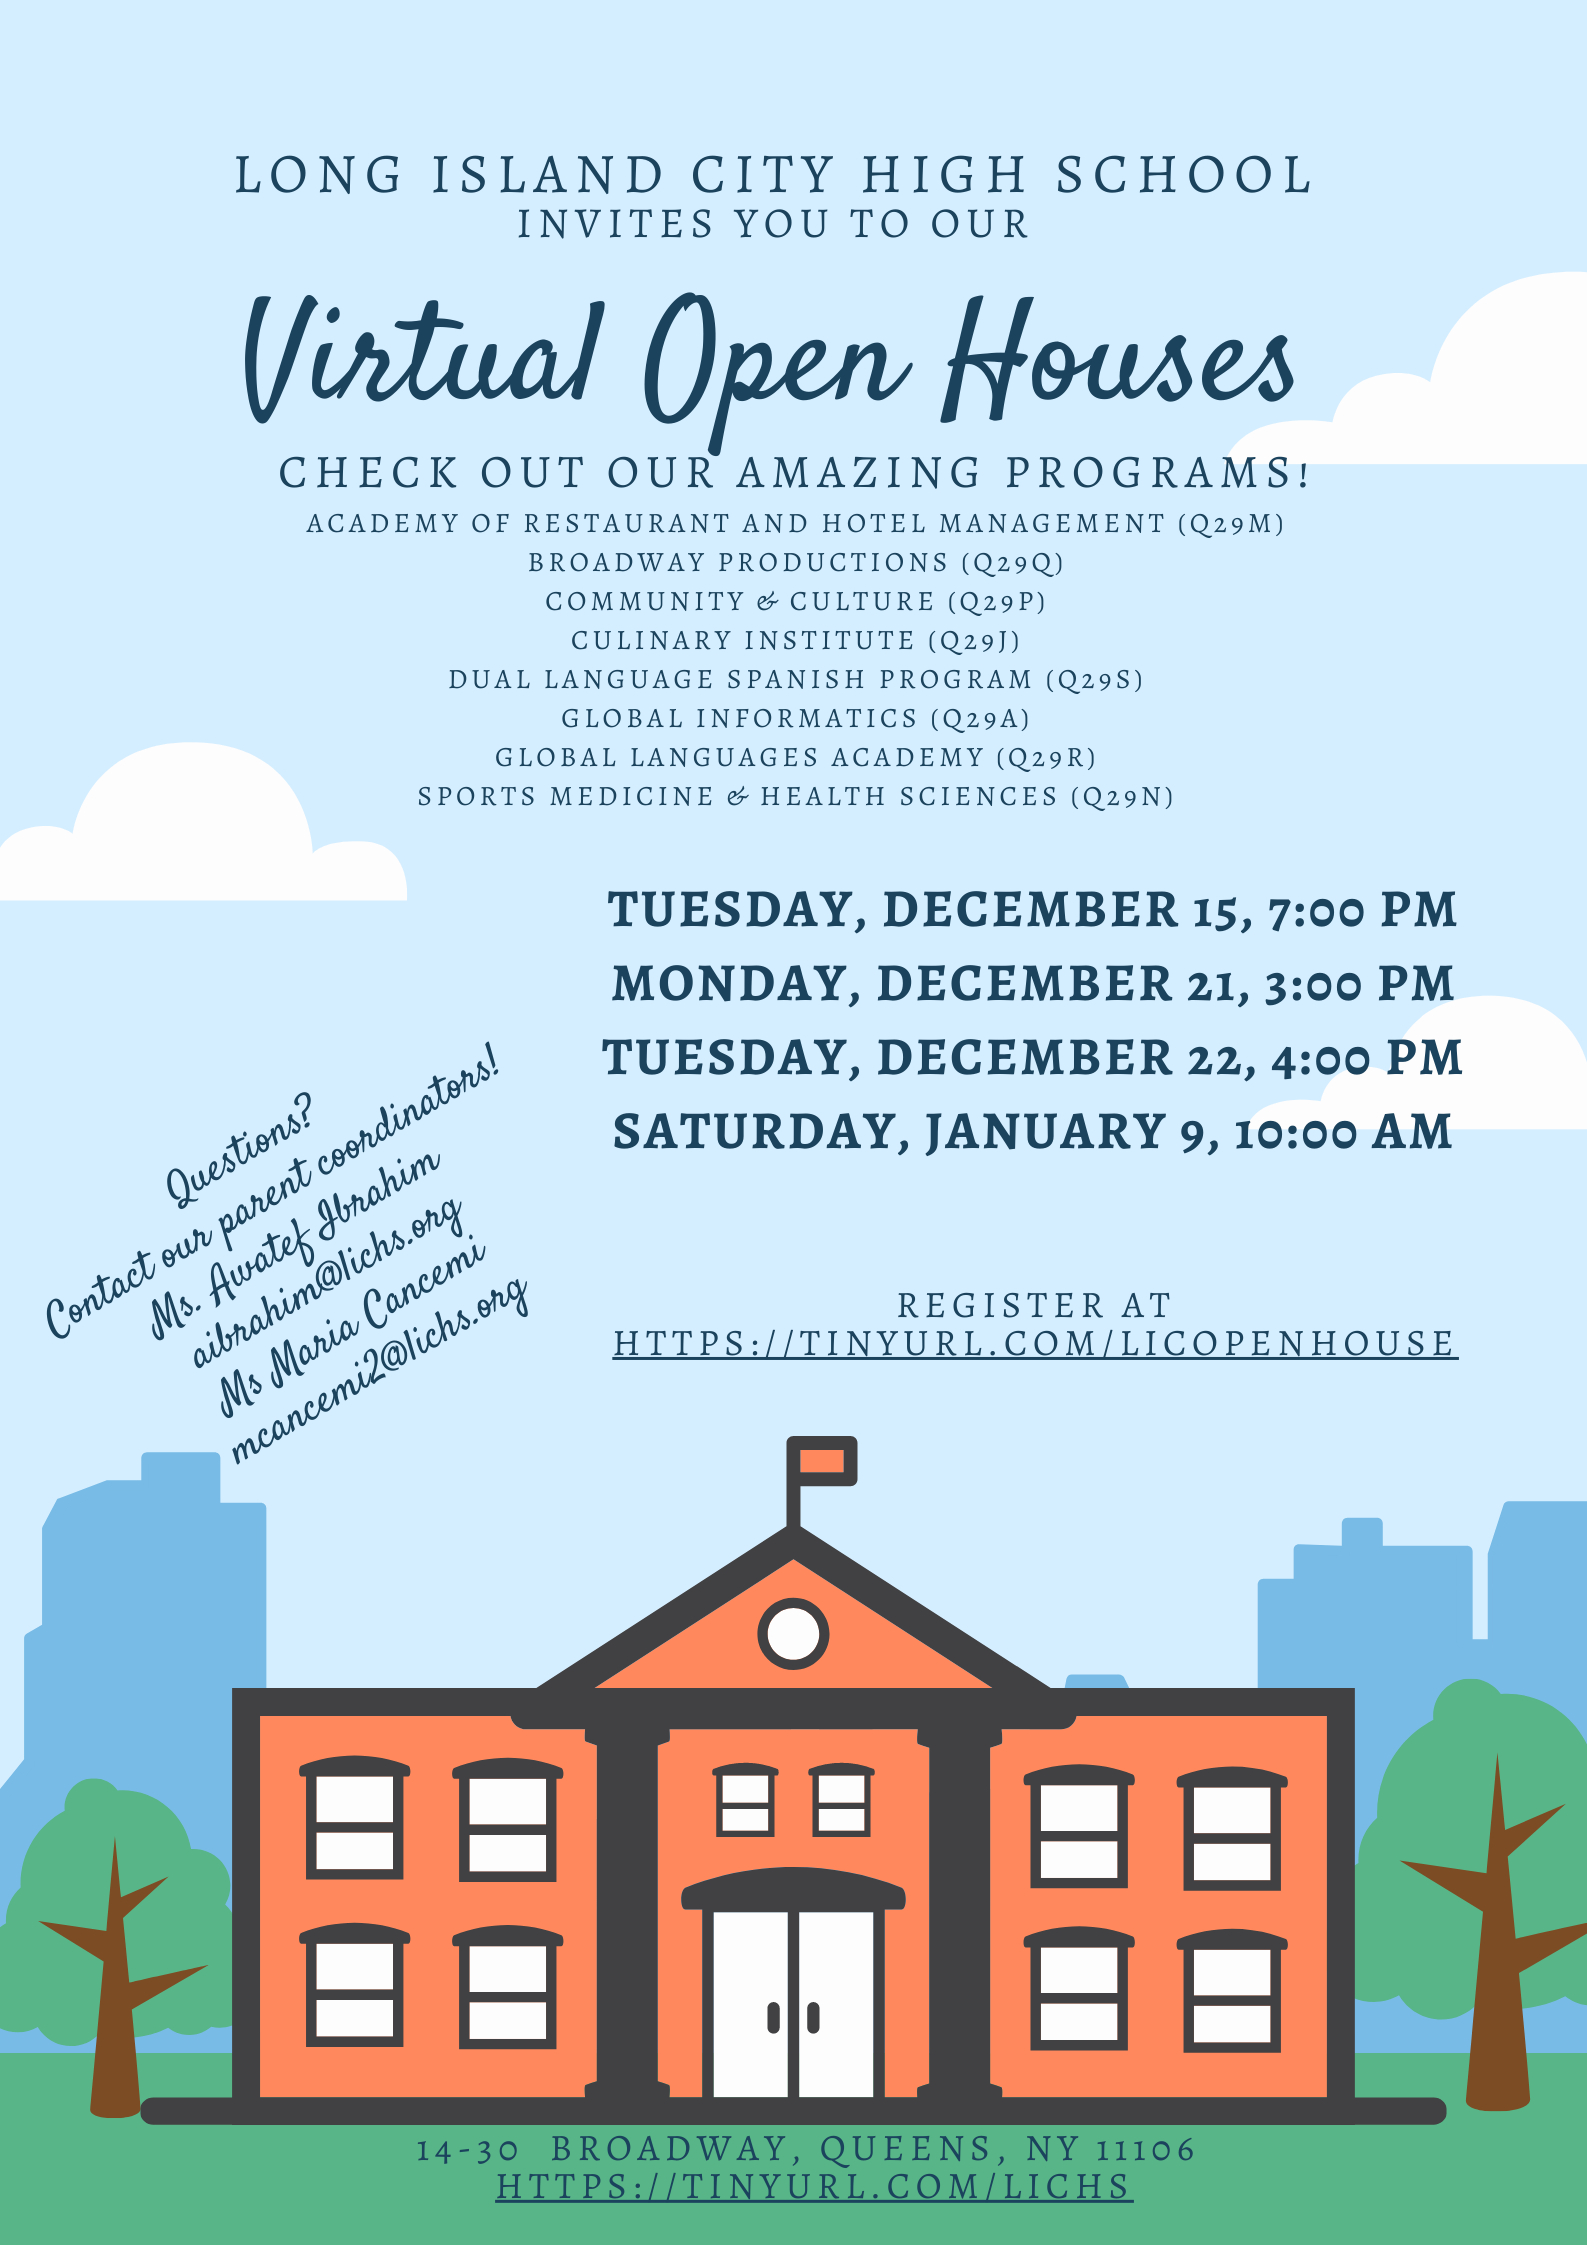 LICHS Virtual Open Houses flyer with list of programs and dates